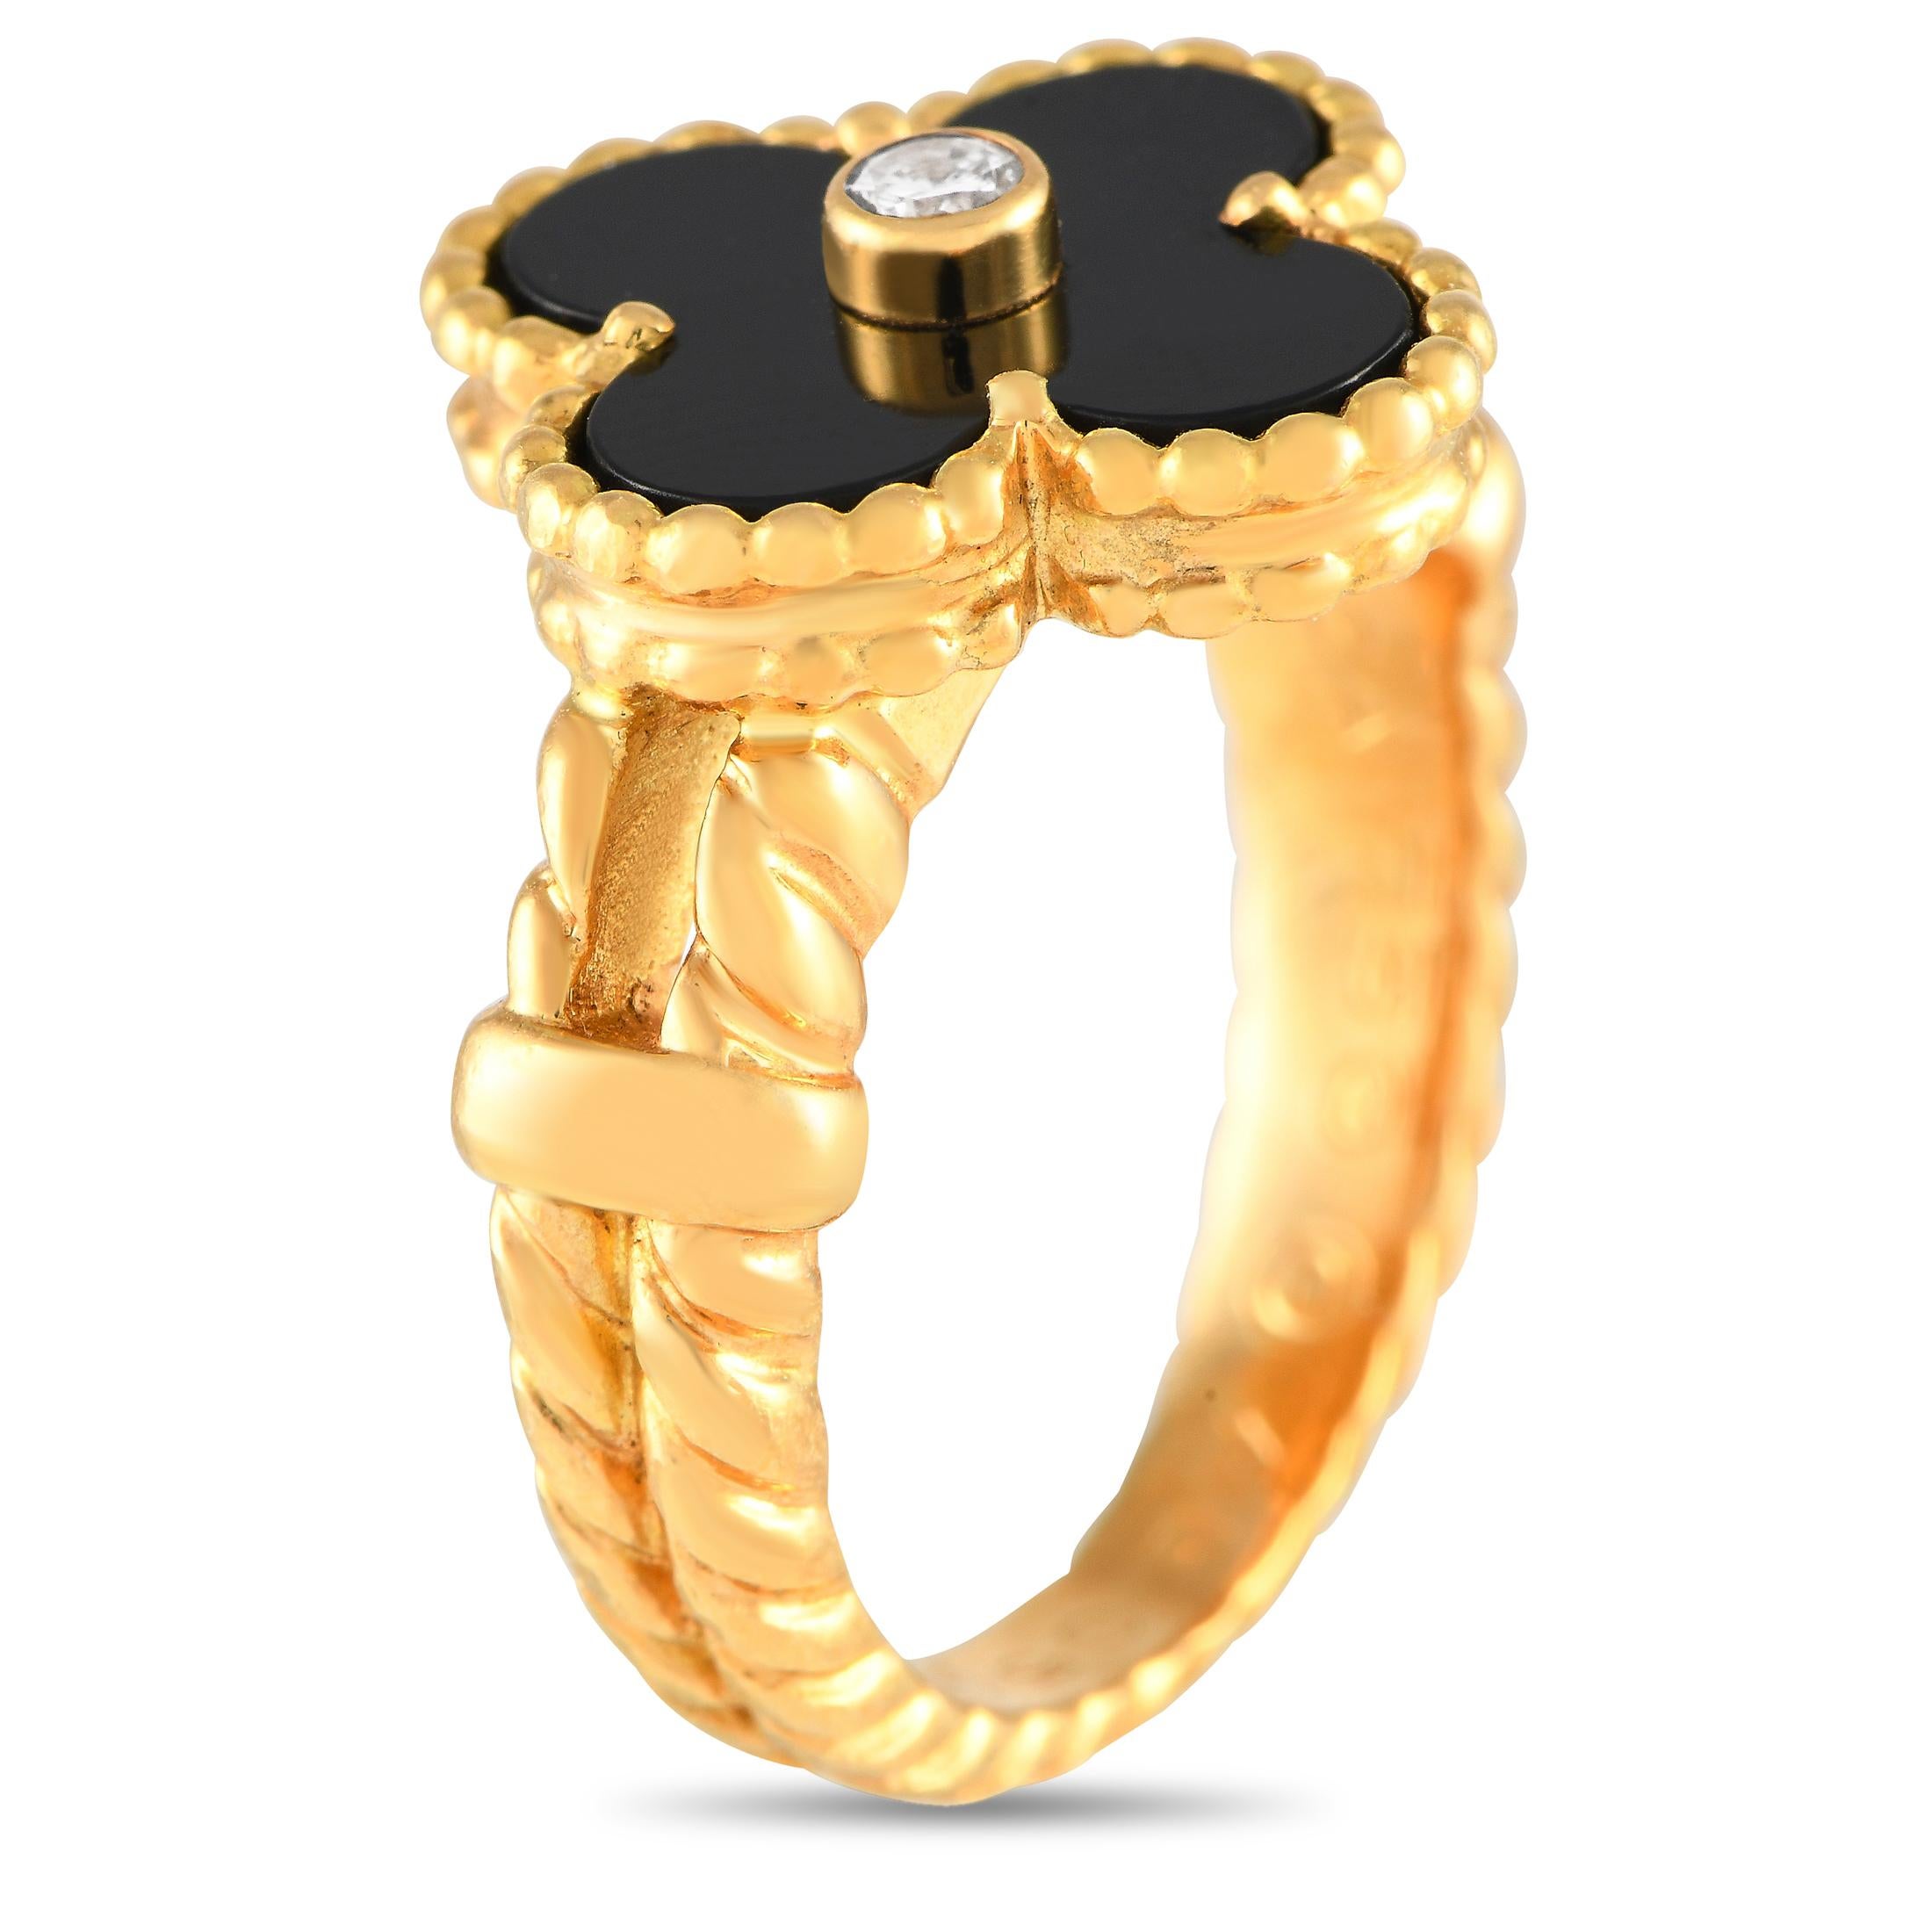 A must-have in a jewelry capsule wardrobe. This vintage Van Cleef & Arpels Alhambra ring features an elaborate rope-twist band crafted in 18K yellow gold. It bears a quatrefoil motif with a black onyx inlay and a bezel set diamond at the center. The